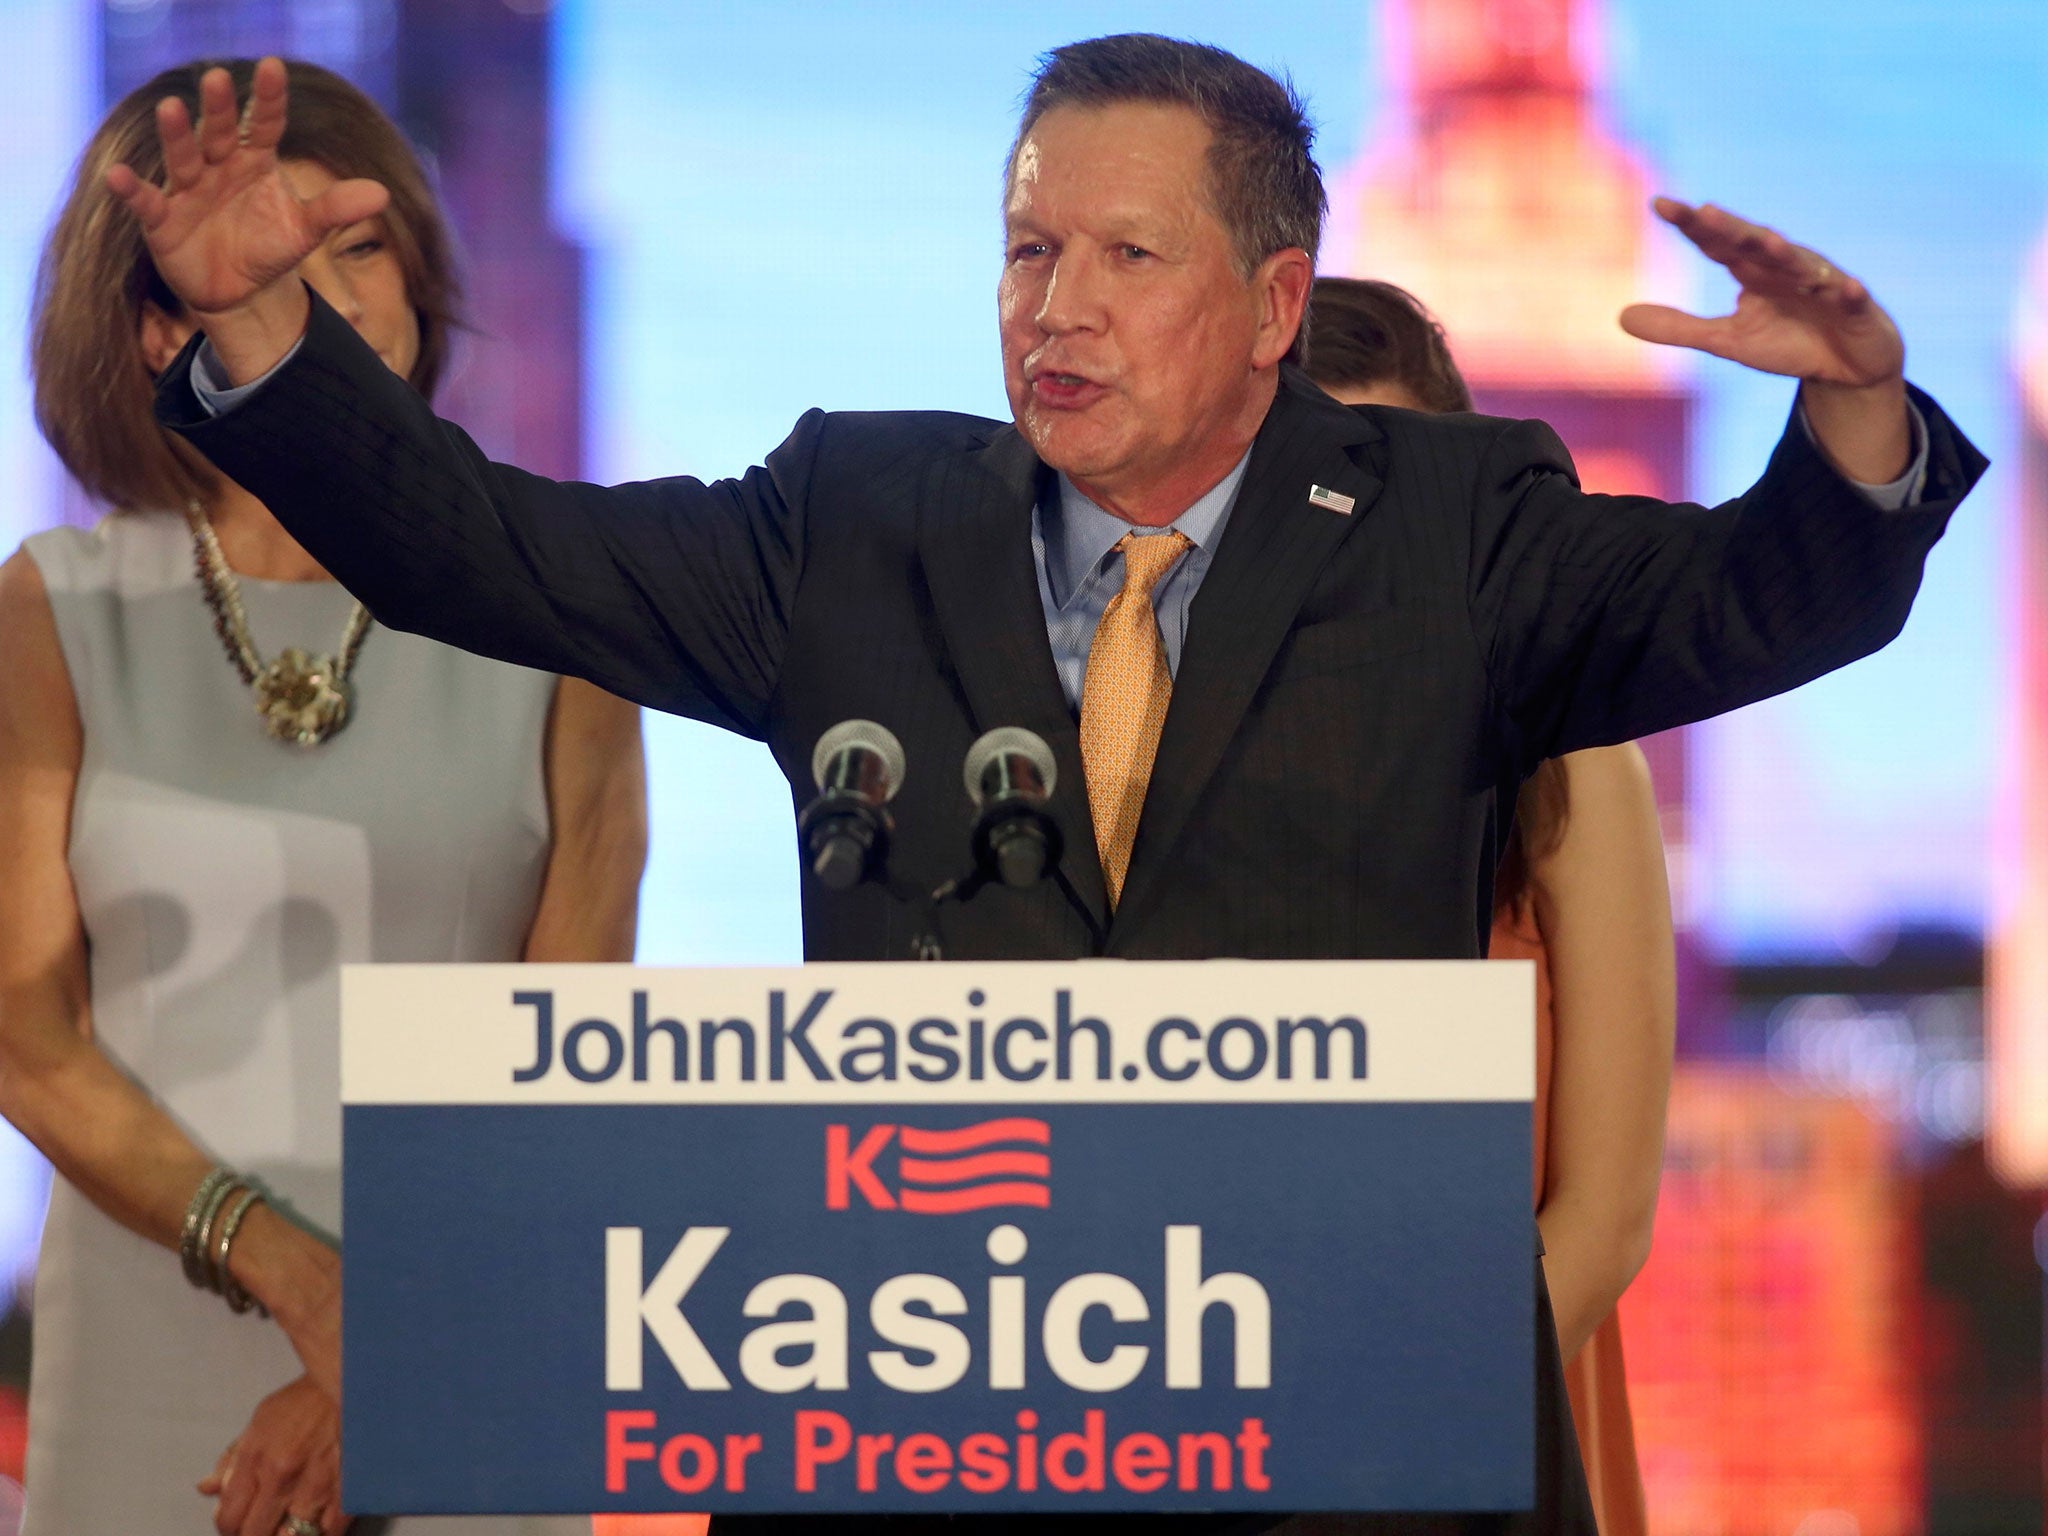 Republican presidential candidate John Kasich speaks to supporters after being declared the winner of the Ohio primary